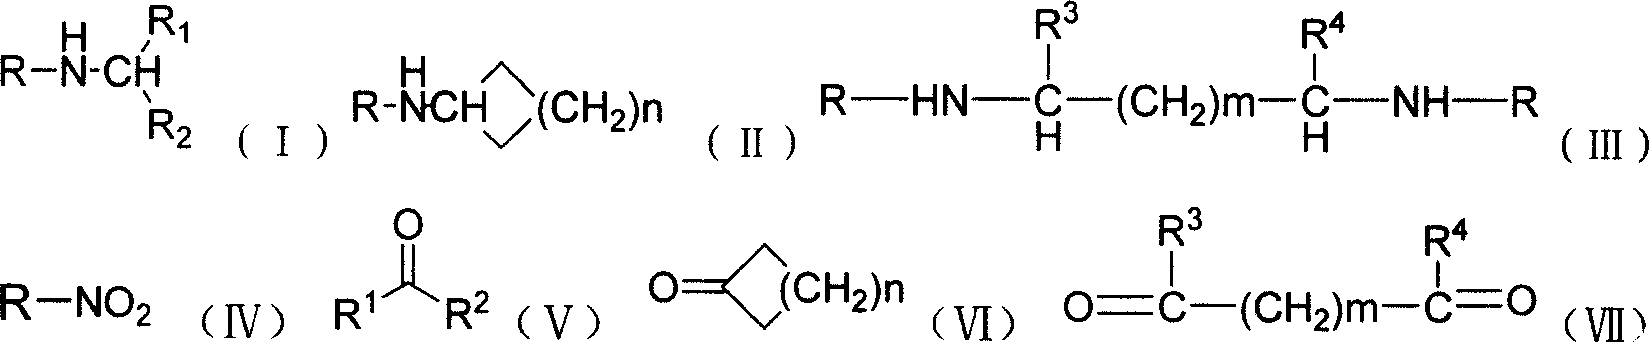 Production of secondary-amine compound